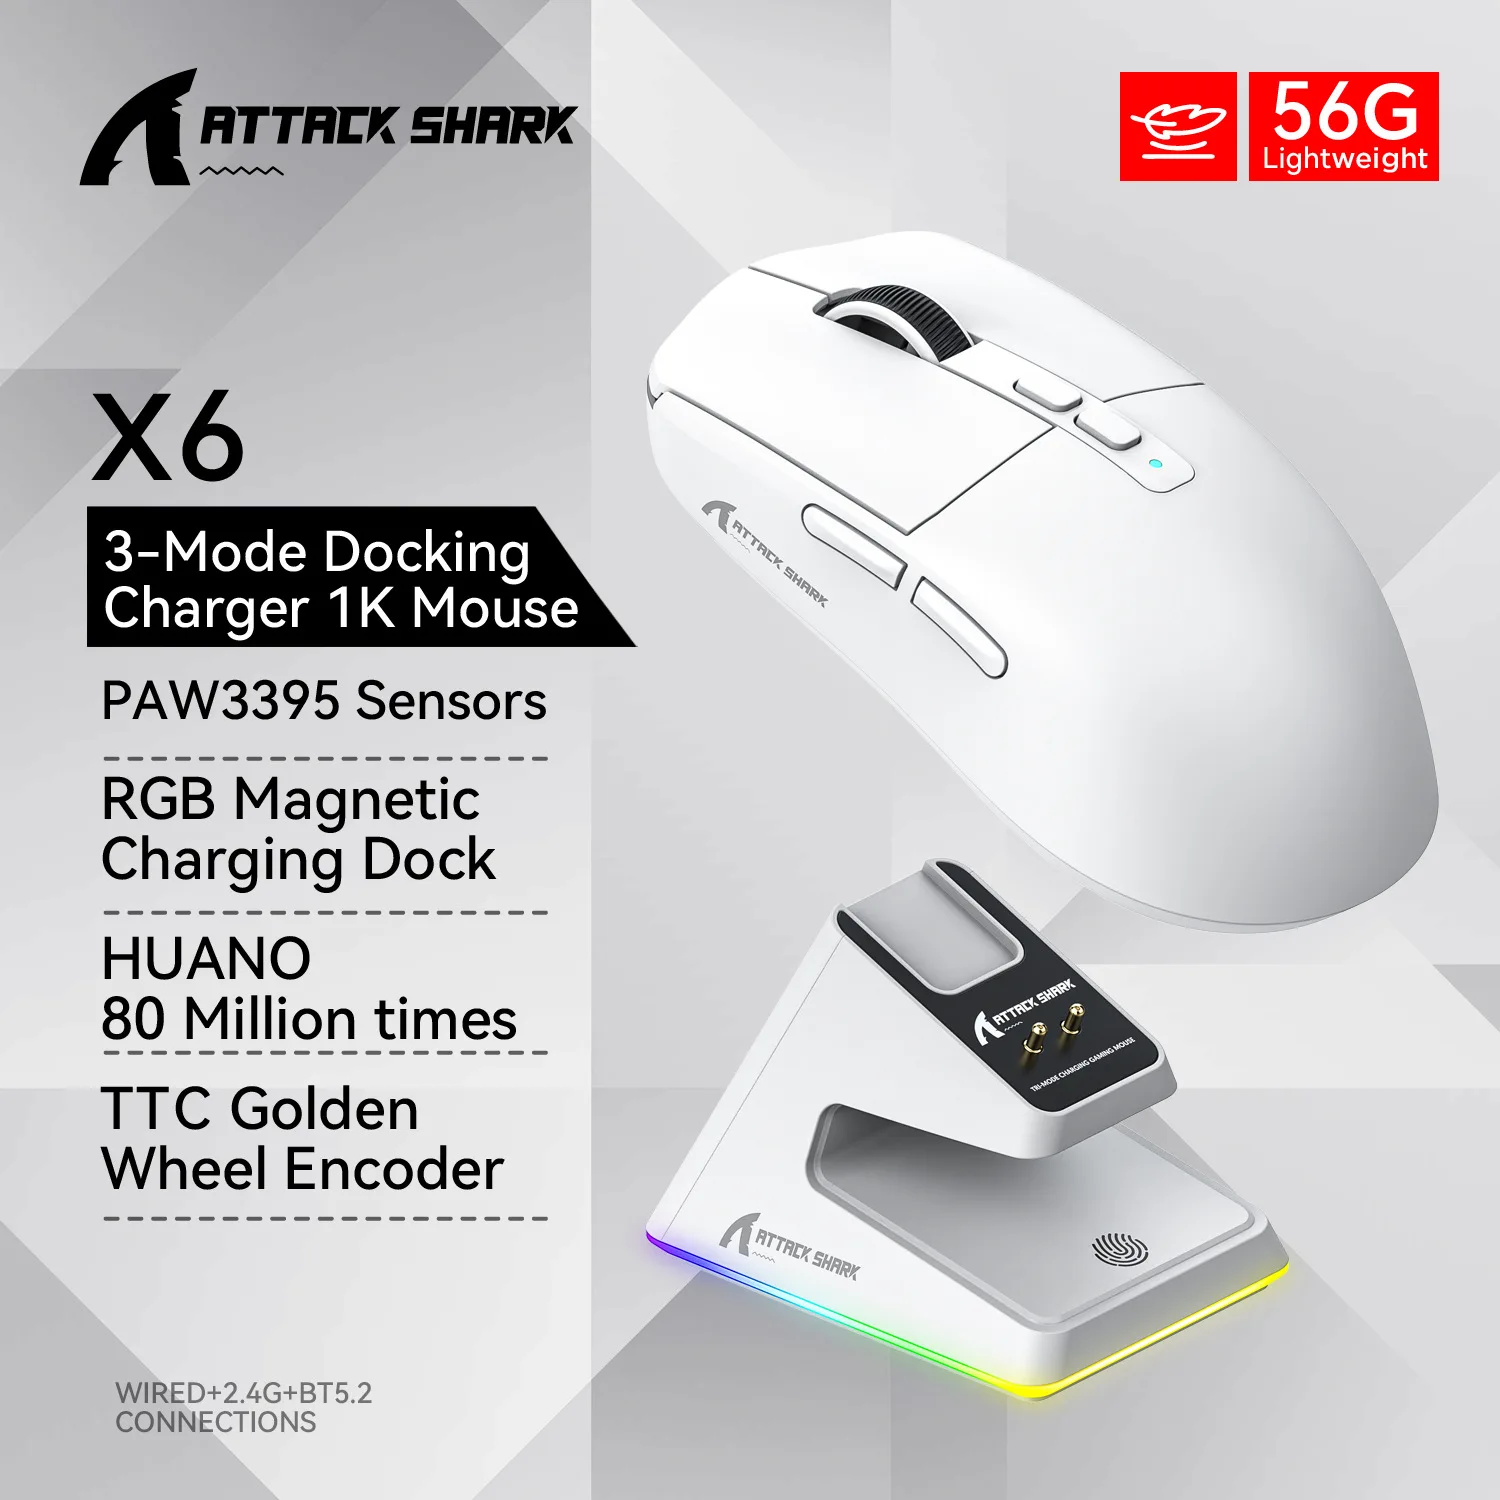 Attack Shark X6 Wireless Gaming Mouse 2.4G Bluetooth Wired 3 Mode  Lighetweight Mouse 26K DPI PAW3395 RGB lighting Charger Stand